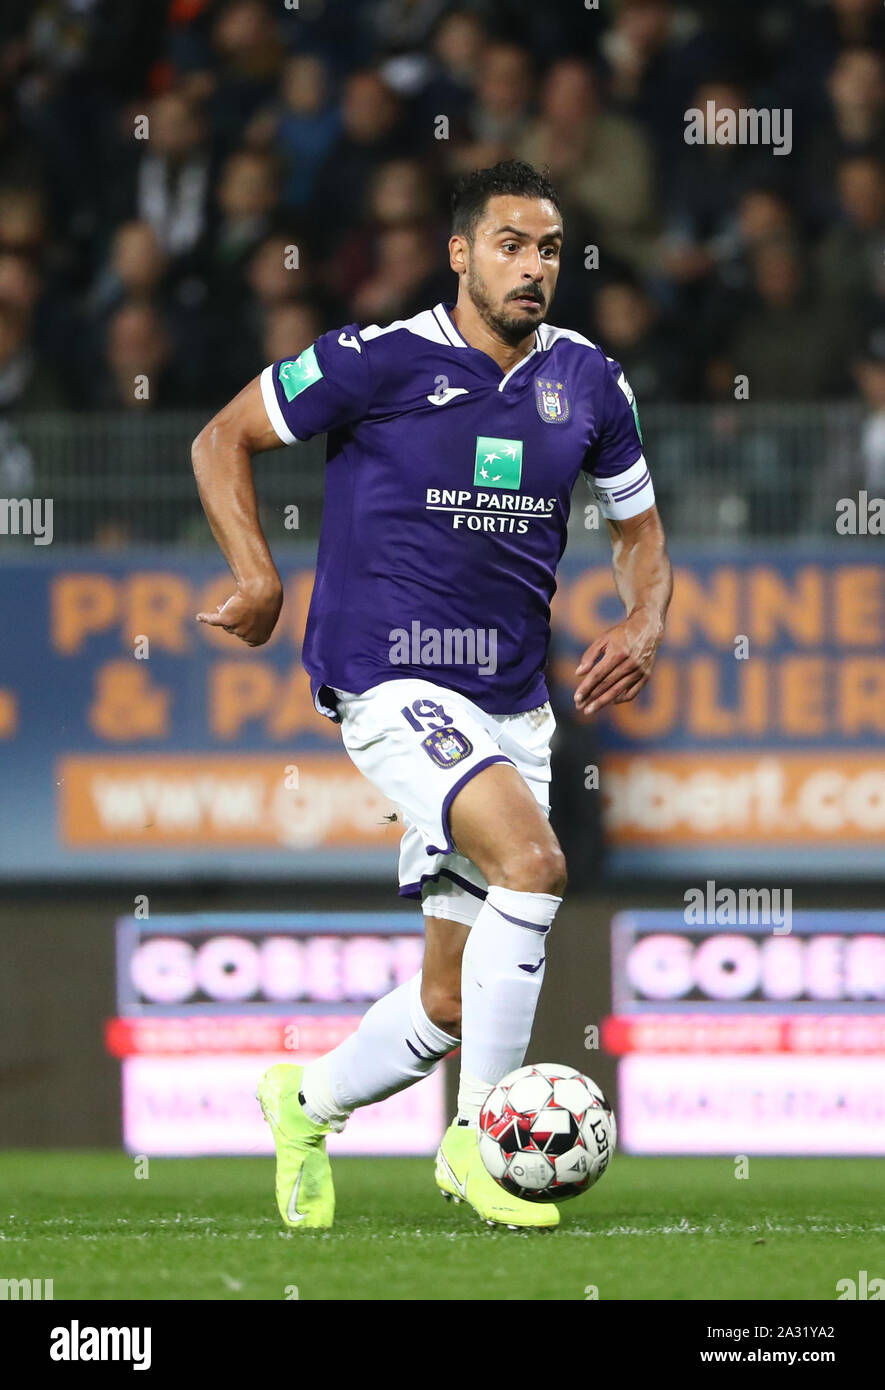 CHARLEROI, BELGIUM - OCTOBER 04: Nacer Chadli of Anderlecht in action  during the Jupiler Pro League match day 10 between Sporting Charleroi and  RSC Anderlecht on October 04, 2019 in Charleroi, Belgium. (